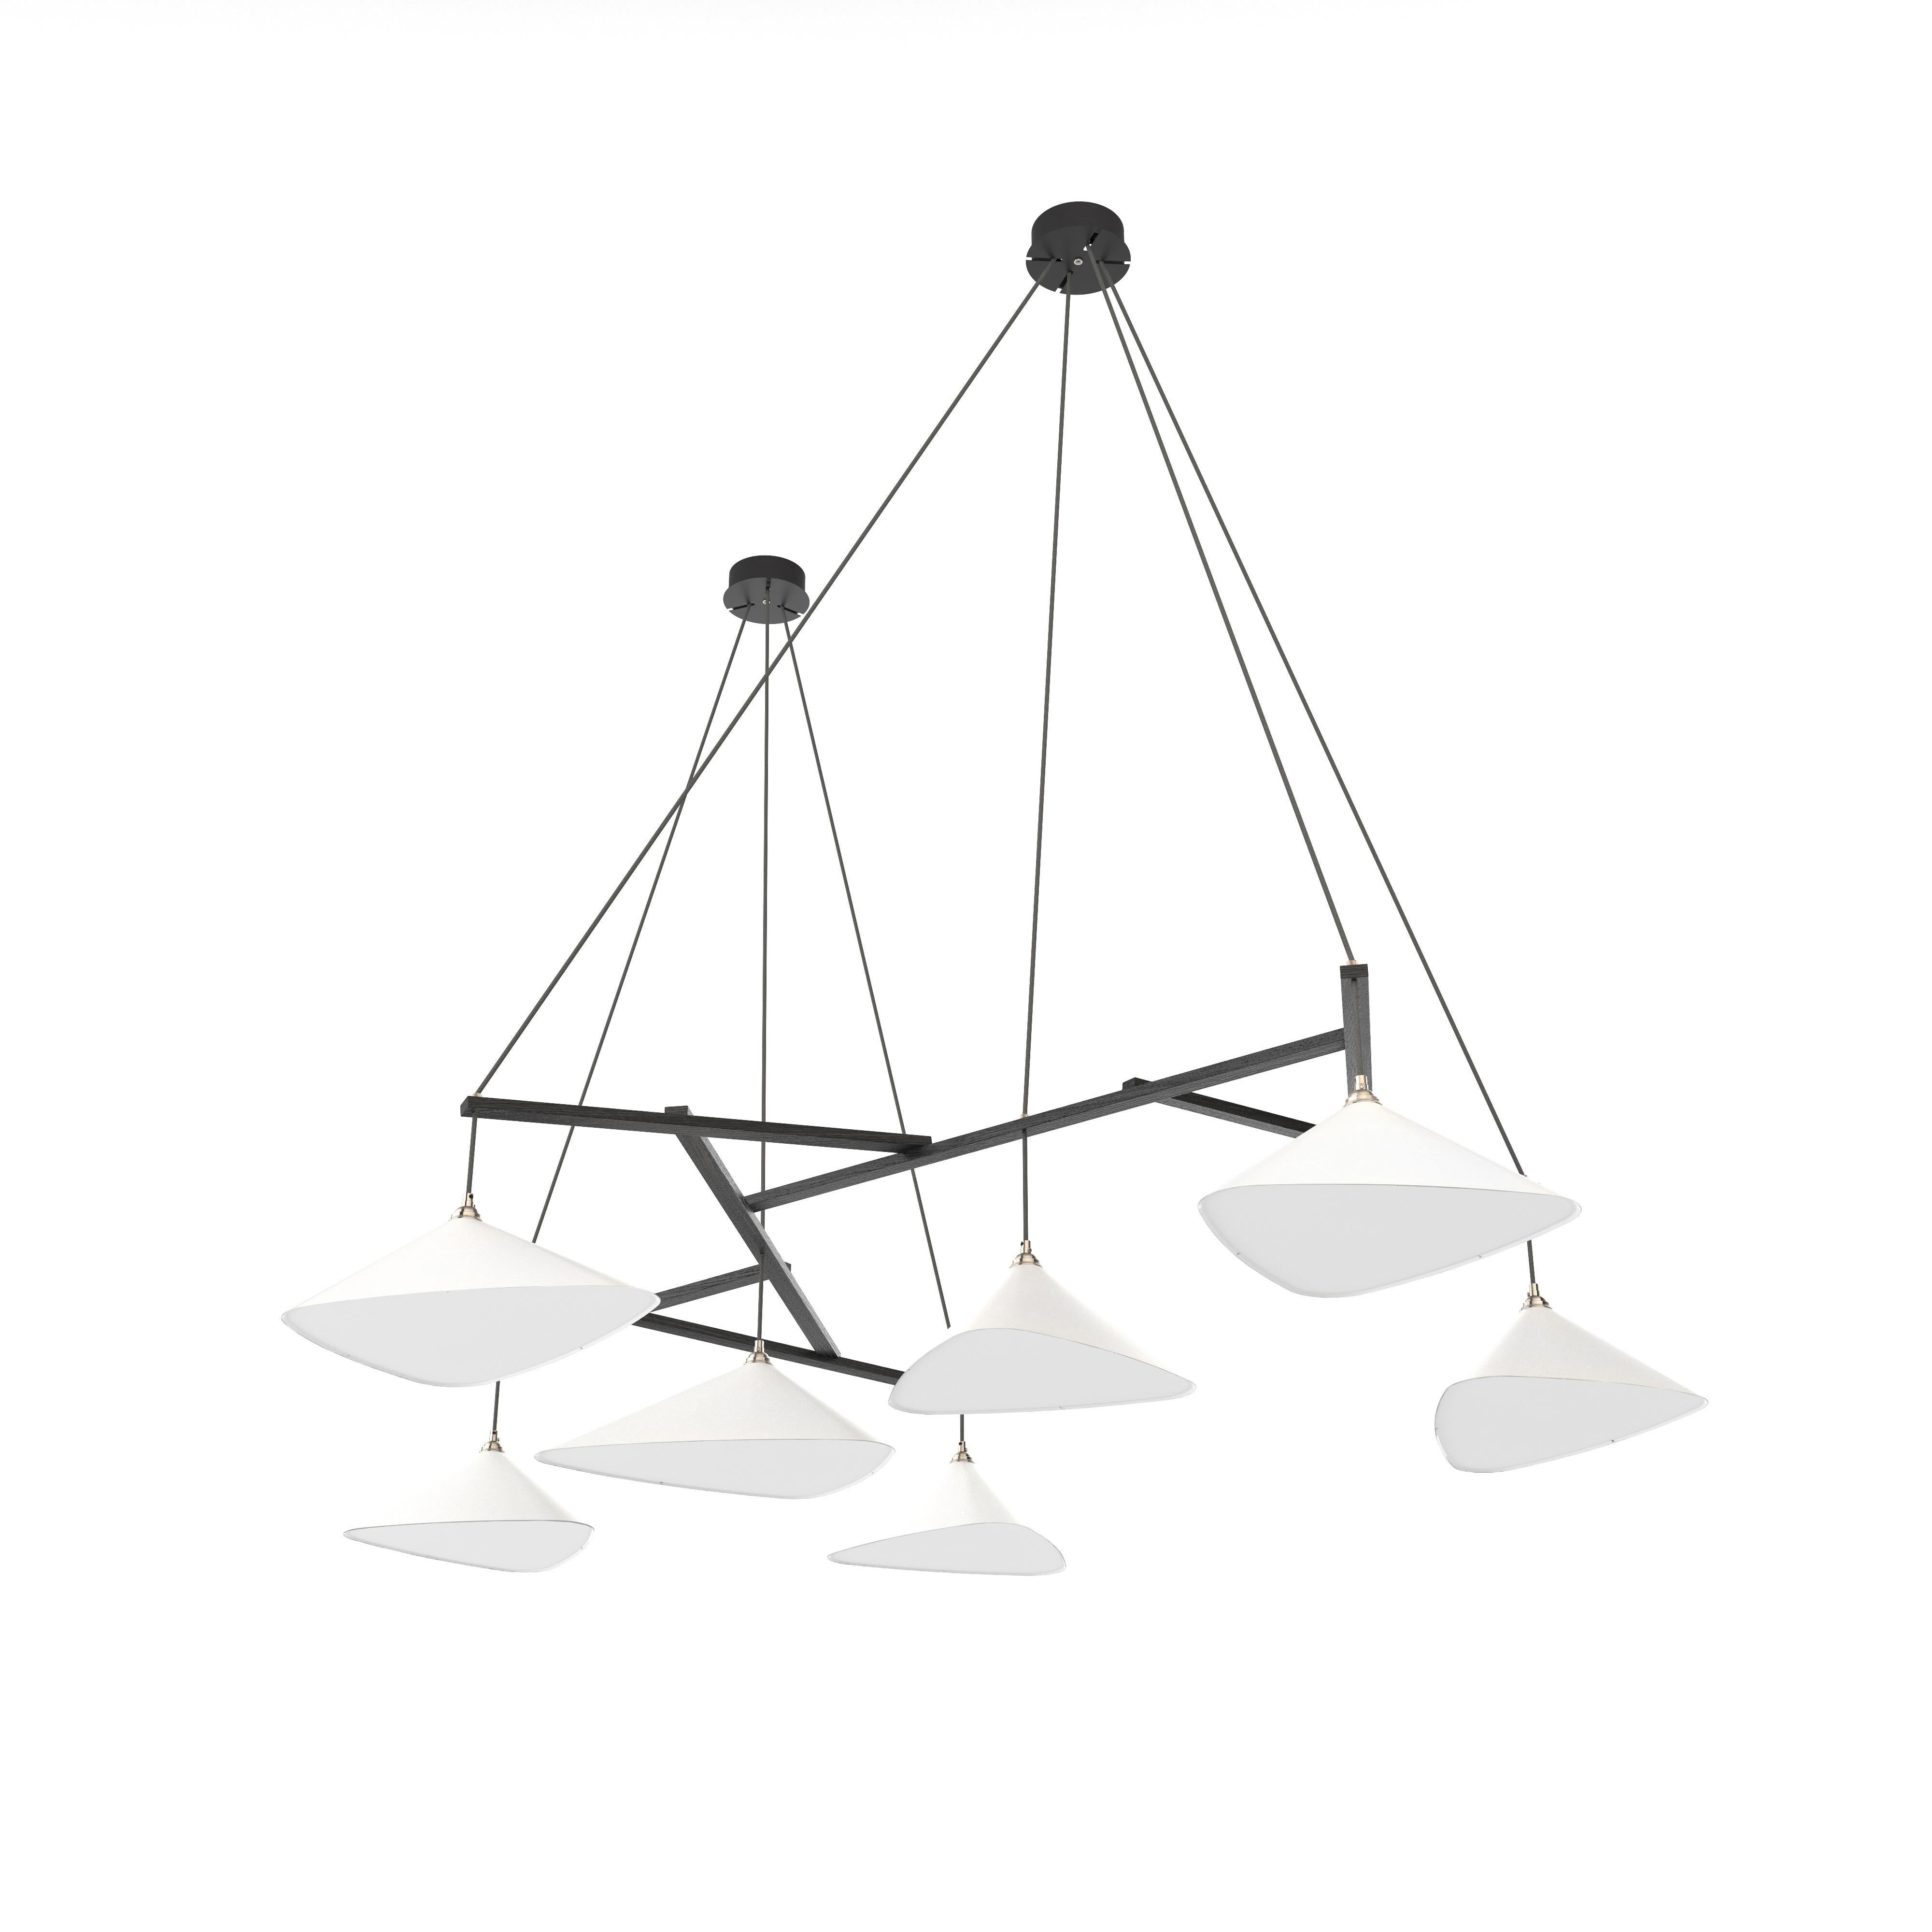 Monumental Daniel Becker 'Emily 7' Chandelier in White & Black for Moss Objects. Designed by Berlin luminary Daniel Becker and handmade to order using modern and mid-century manufacturing techniques, the Emily Series won the prestigious German